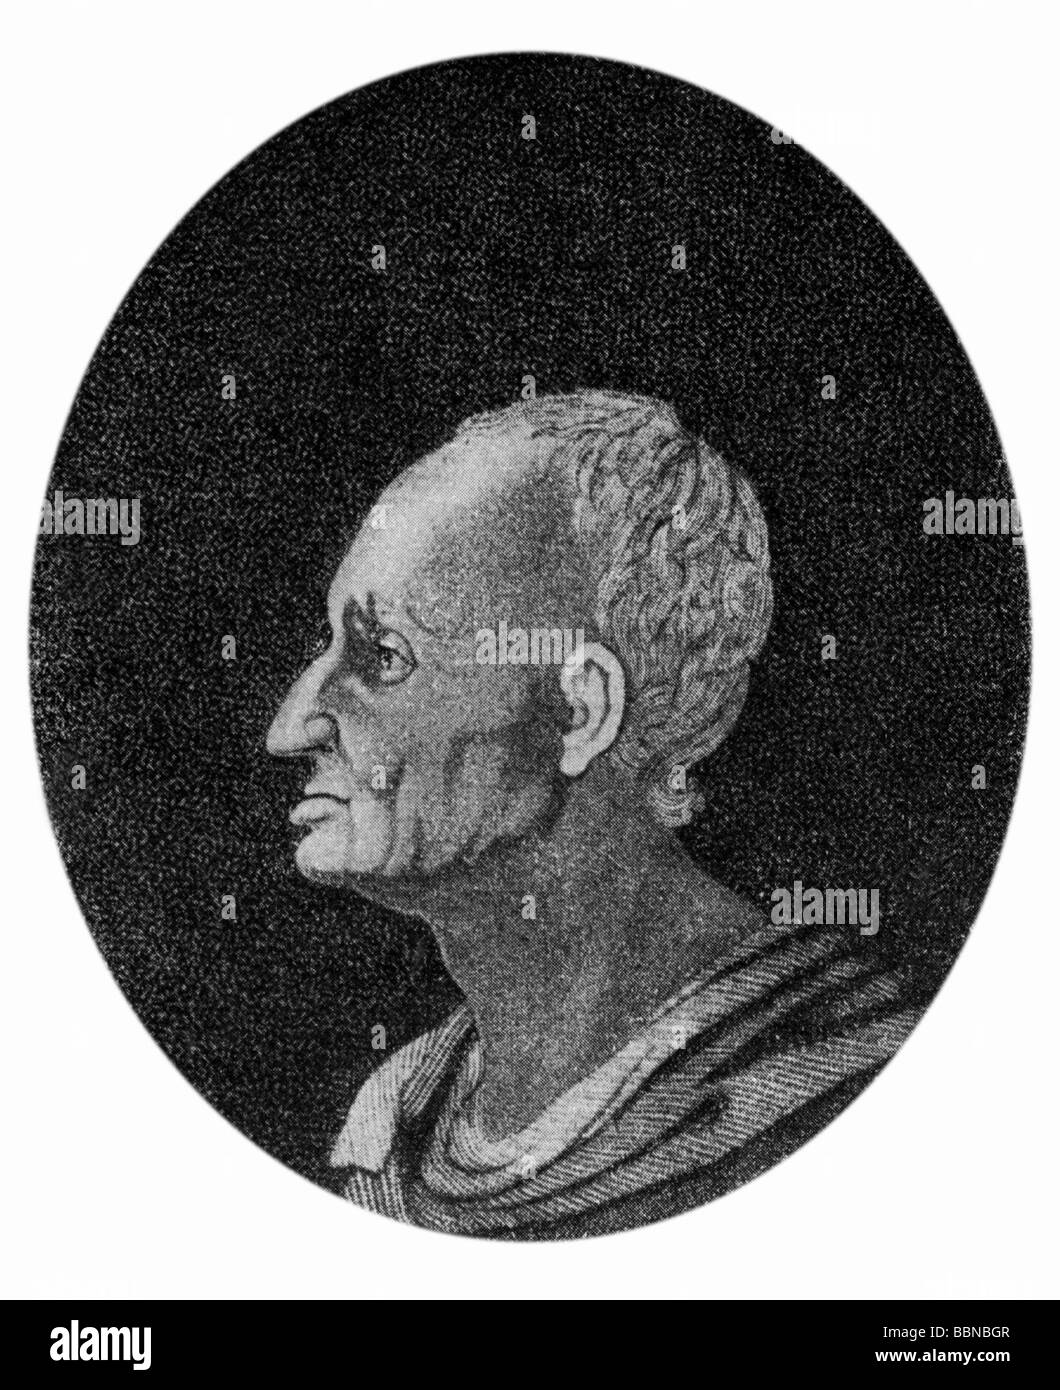 Marggraf, Andreas Sigismund, 3.3.1709 - 7.8.1782, German chemist and pioneer of analytical chemistry, portrait, side-face, after contemporary engraving by Ritter, Stock Photo